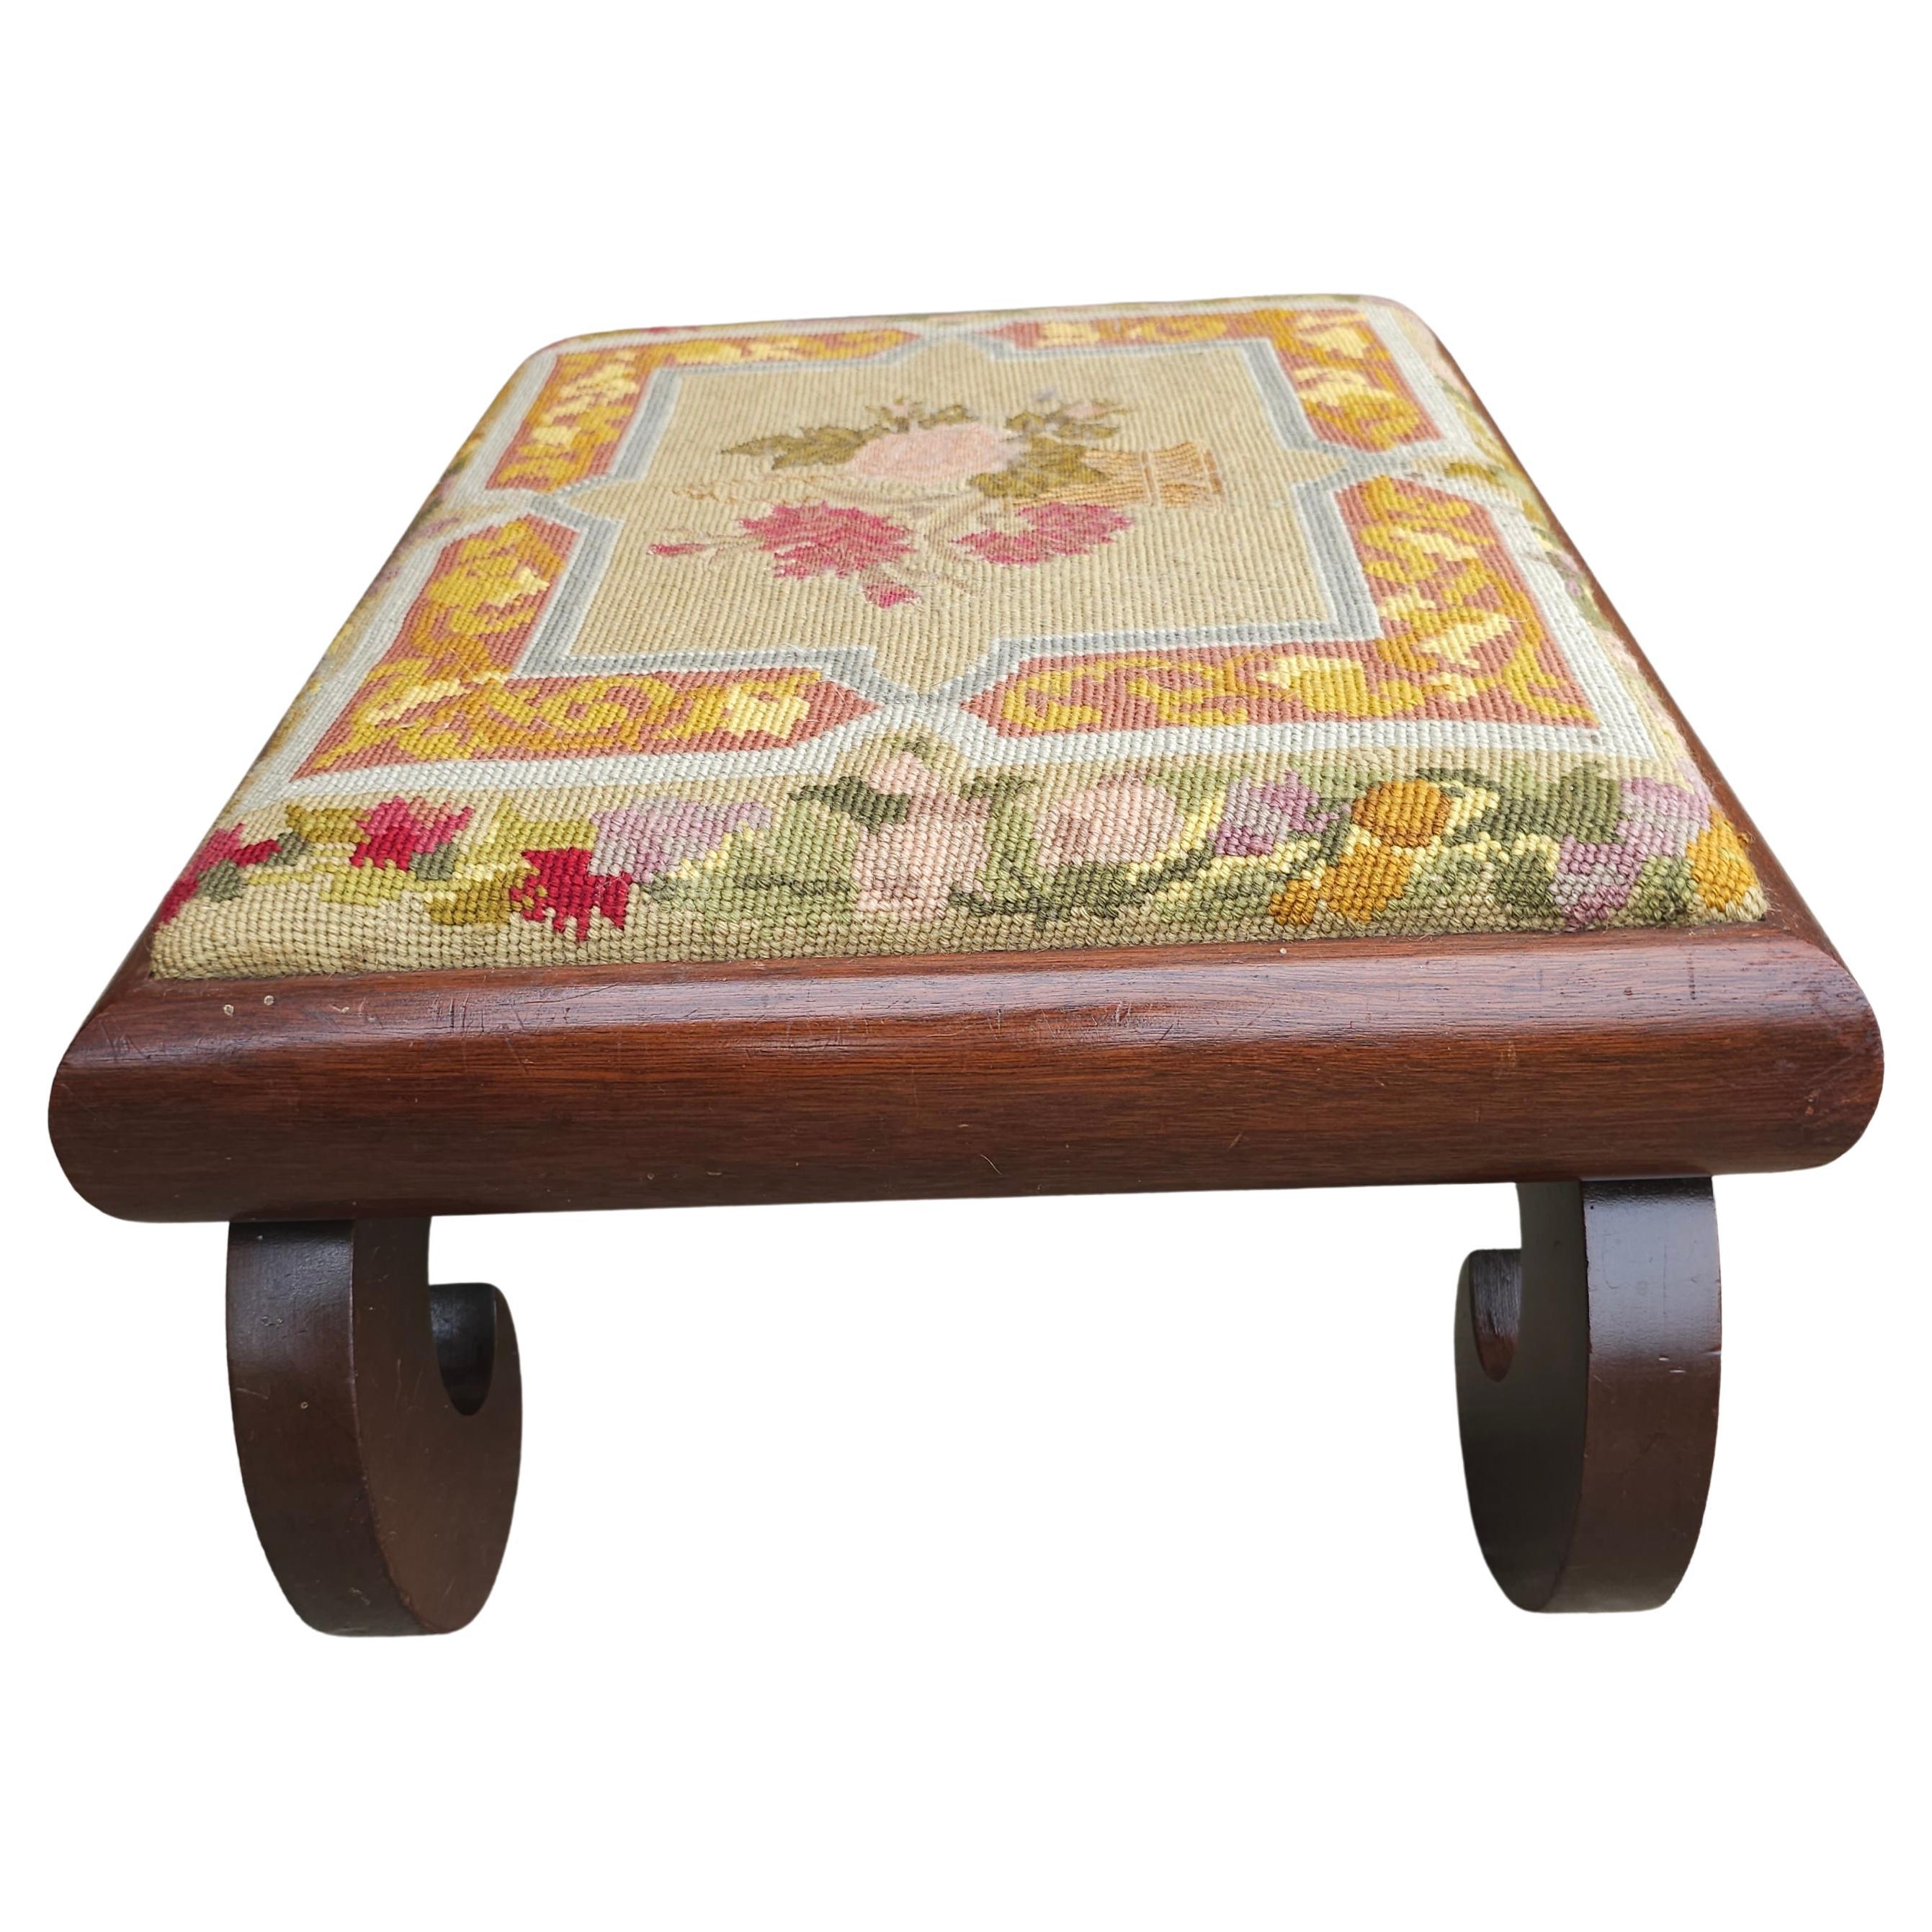 19th Century American Empire Magogany and Needlepoint Upholstered Foot Stool For Sale 1